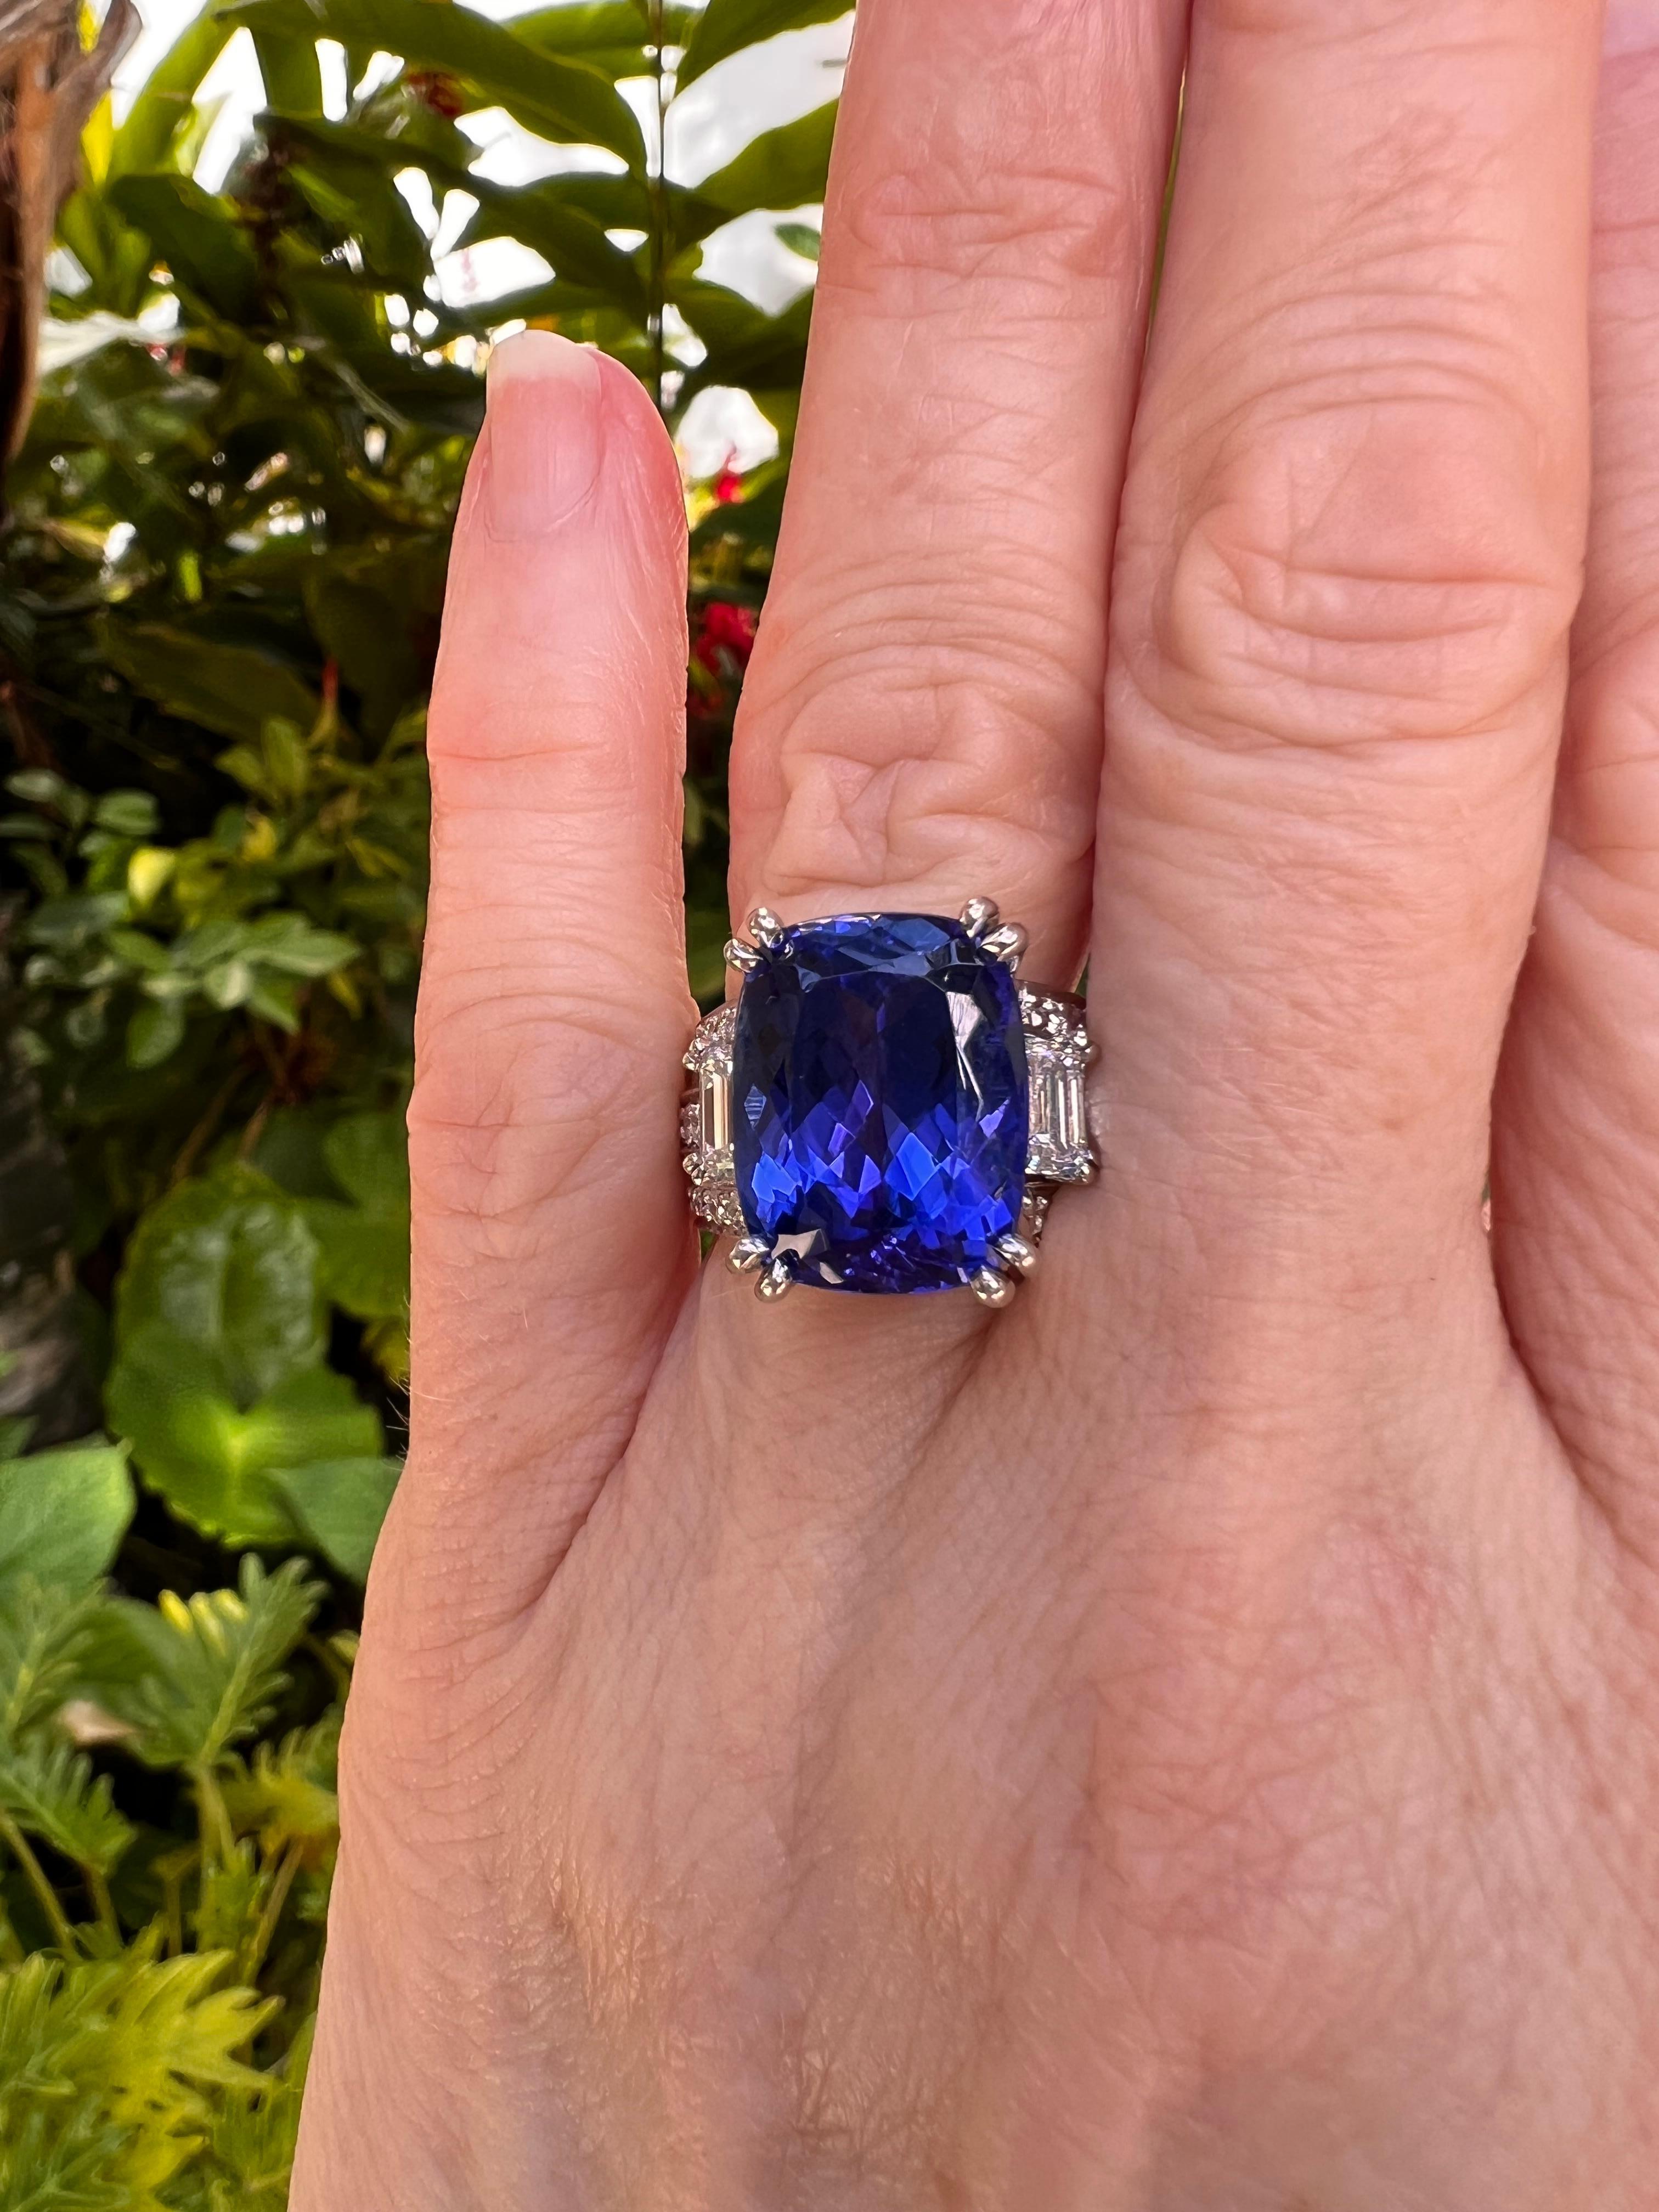 Platinum custom designed ring by Coffin & Trout, centering a cushion-cut tanzanite weighing 10.99 carats with a vibrant bluish-violet color and held by four double prongs.  Flanked by two emerald-cut diamonds on the sides totaling 1.00 total carats.